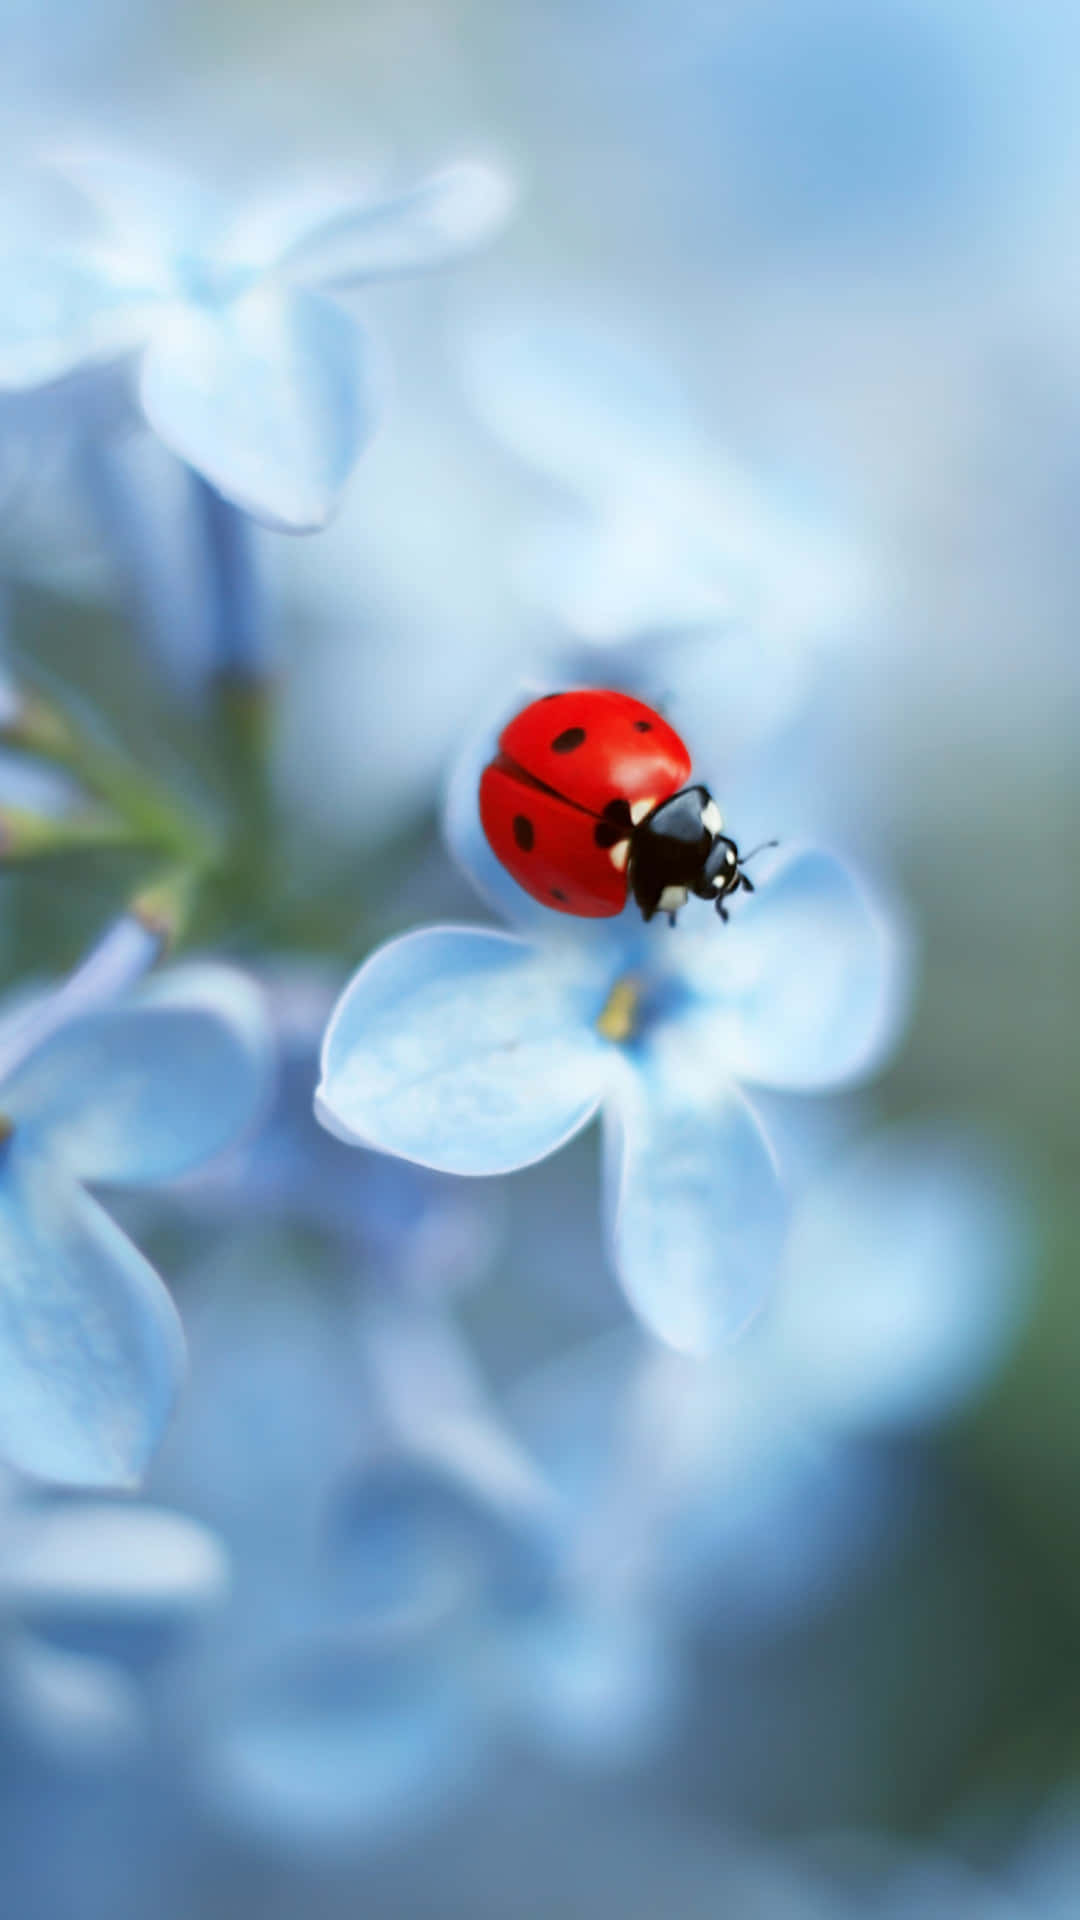 Catch a Ladybug with Your iPhone Wallpaper